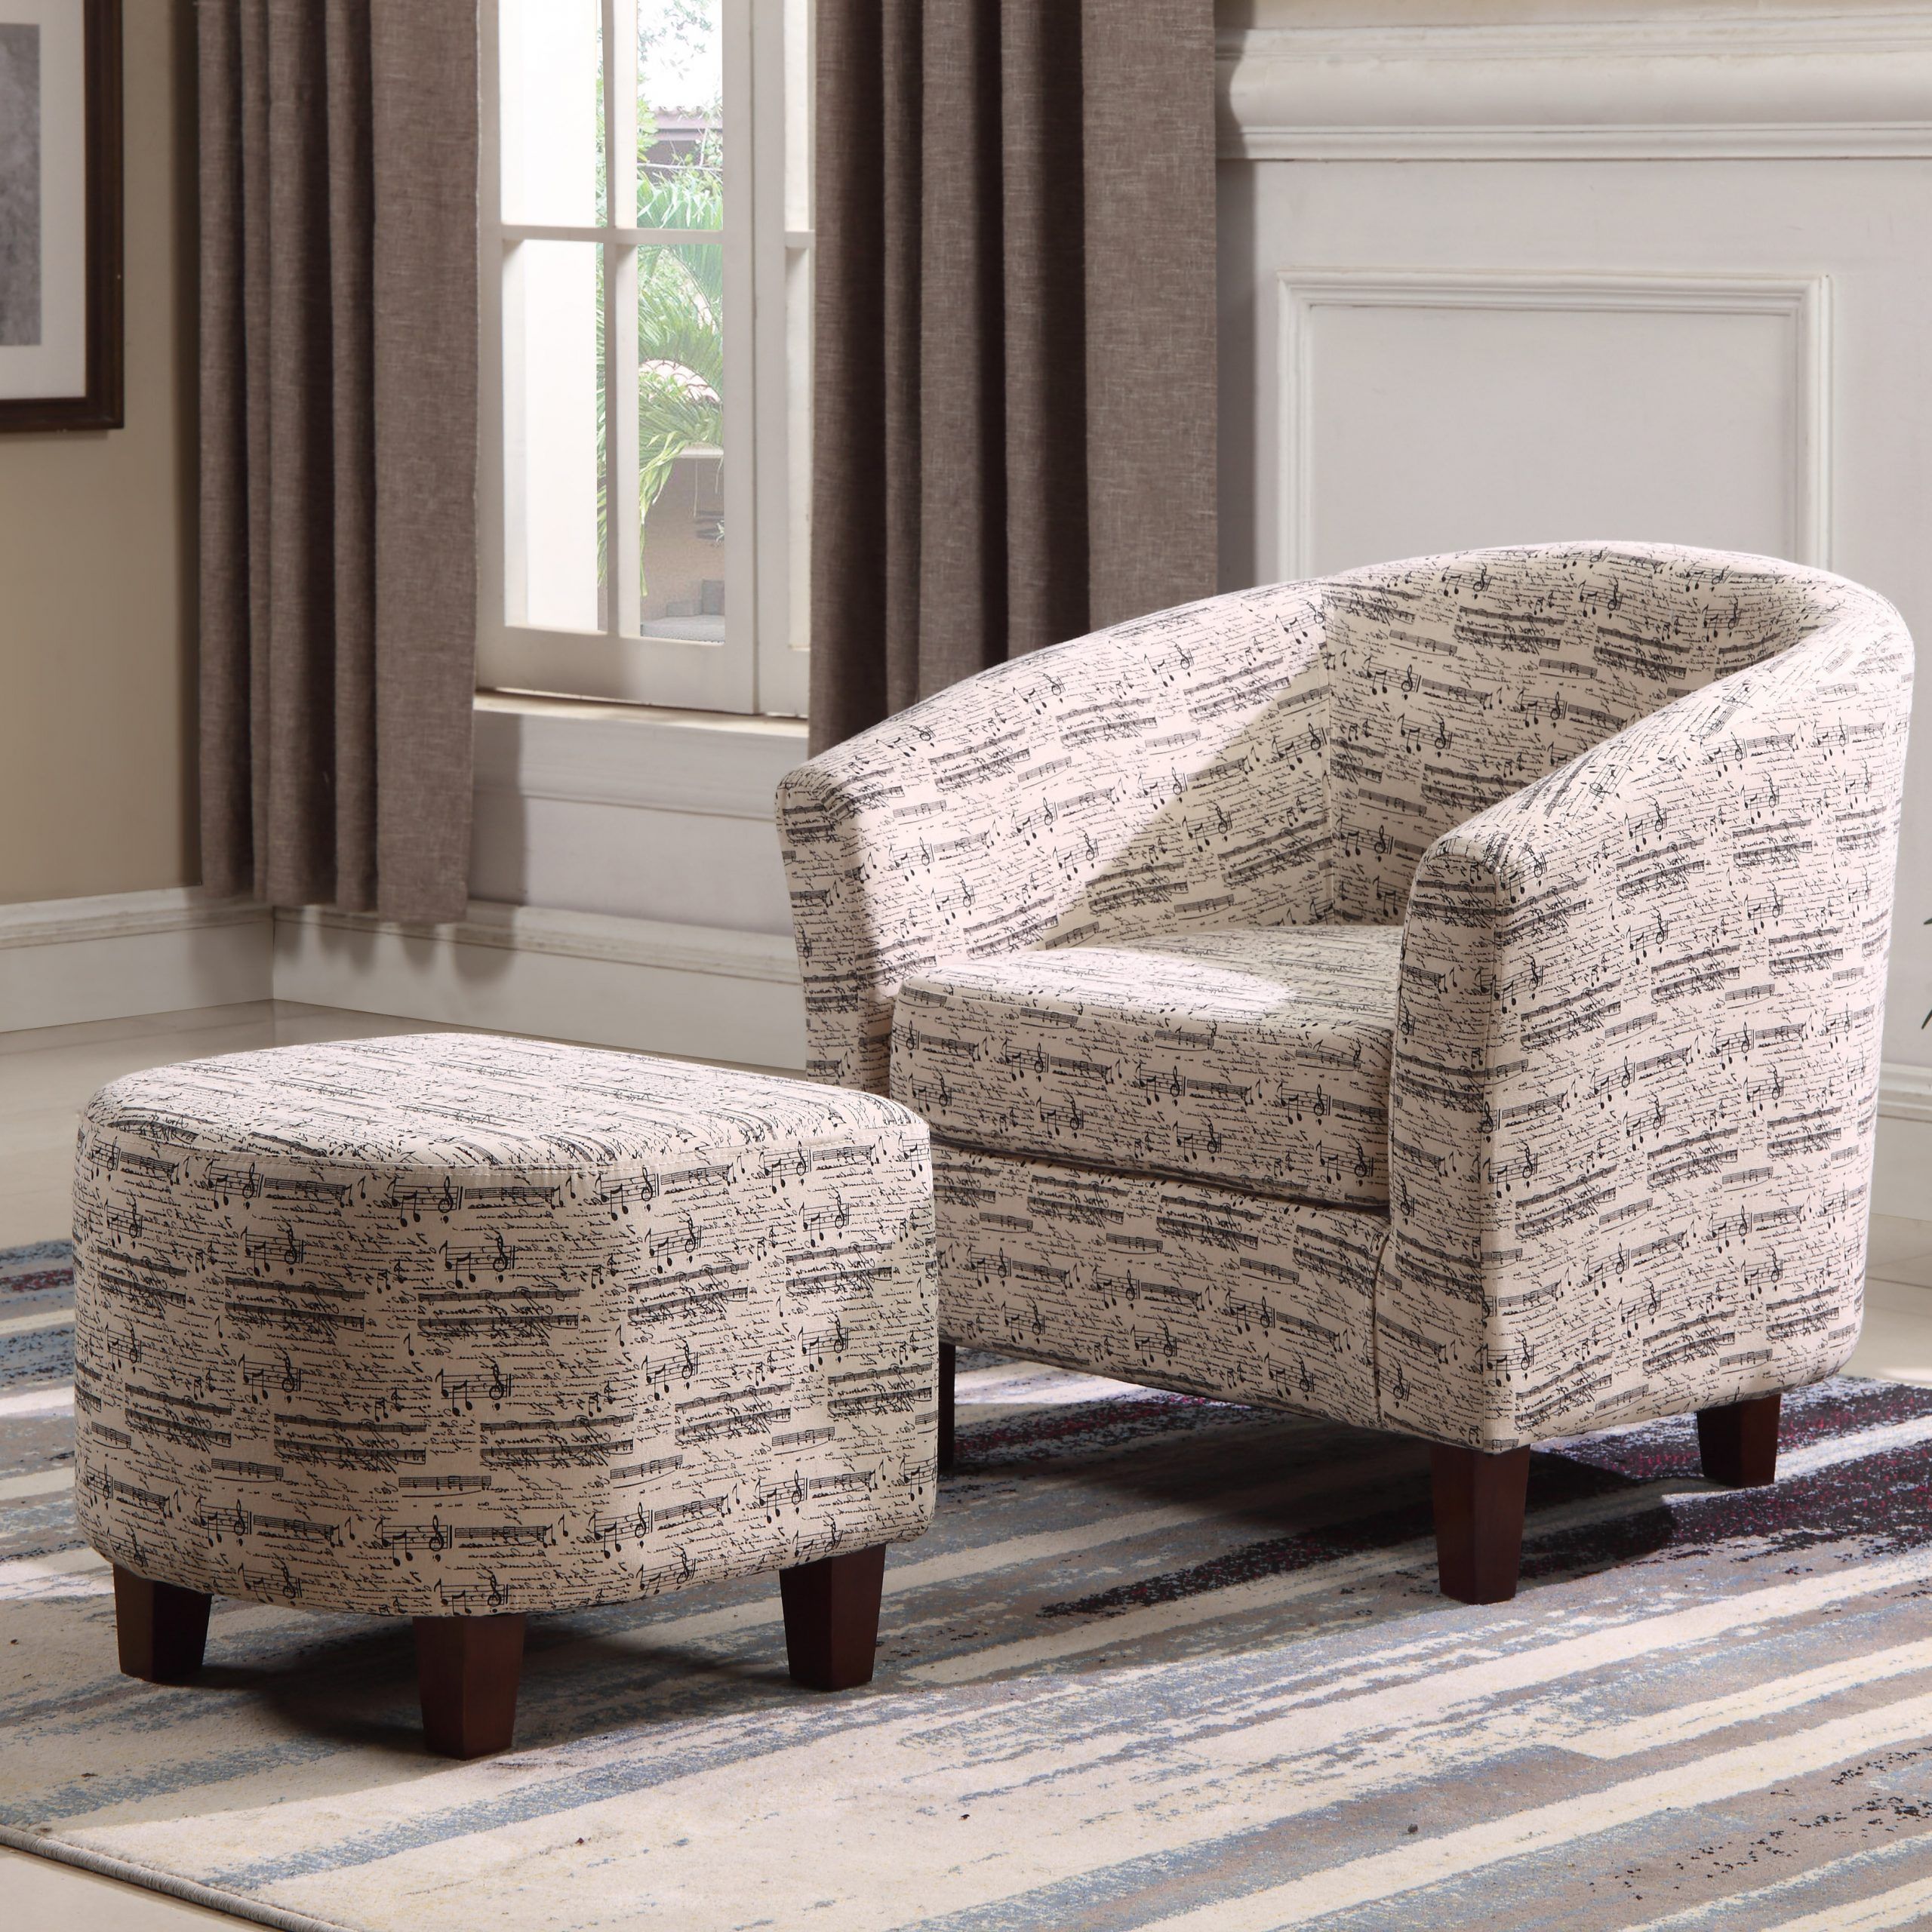 Lochlan Barrel Chair And Ottoman Pertaining To Preferred Louisiana Barrel Chair And Ottoman Sets (View 6 of 20)